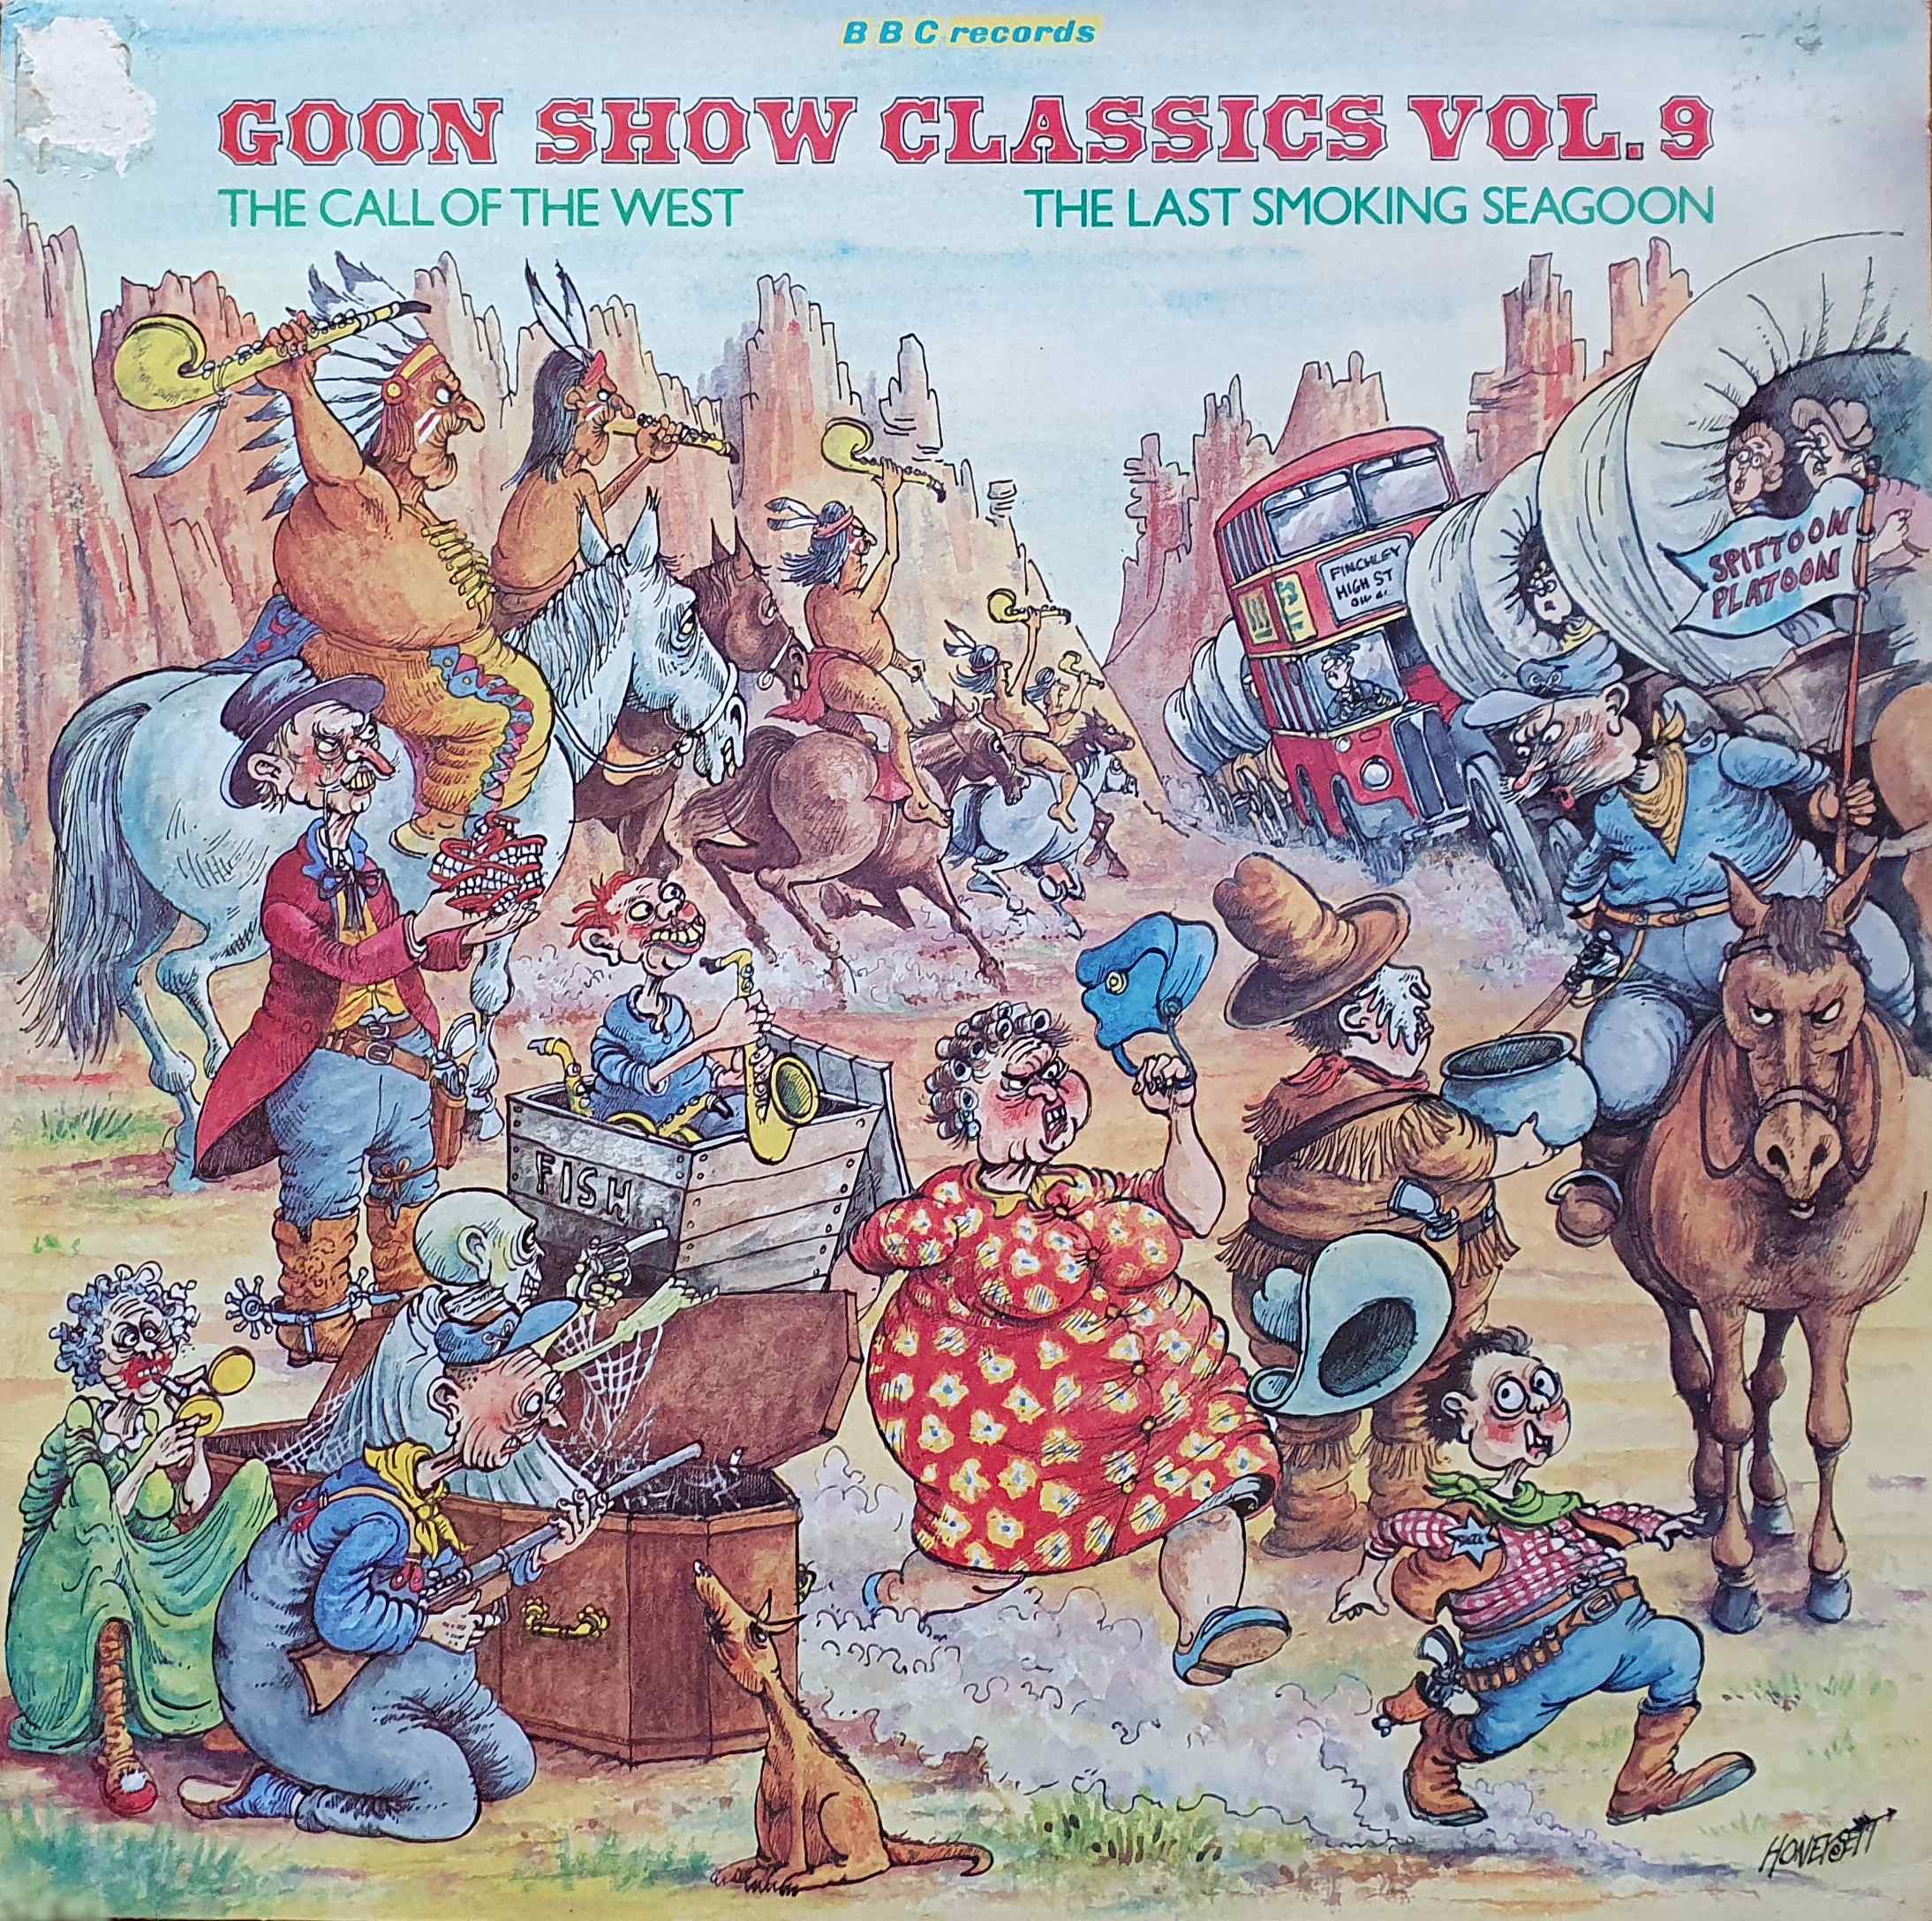 Picture of REB 444 Goon show classics - Volume 9 by artist Spike Milligan from the BBC albums - Records and Tapes library